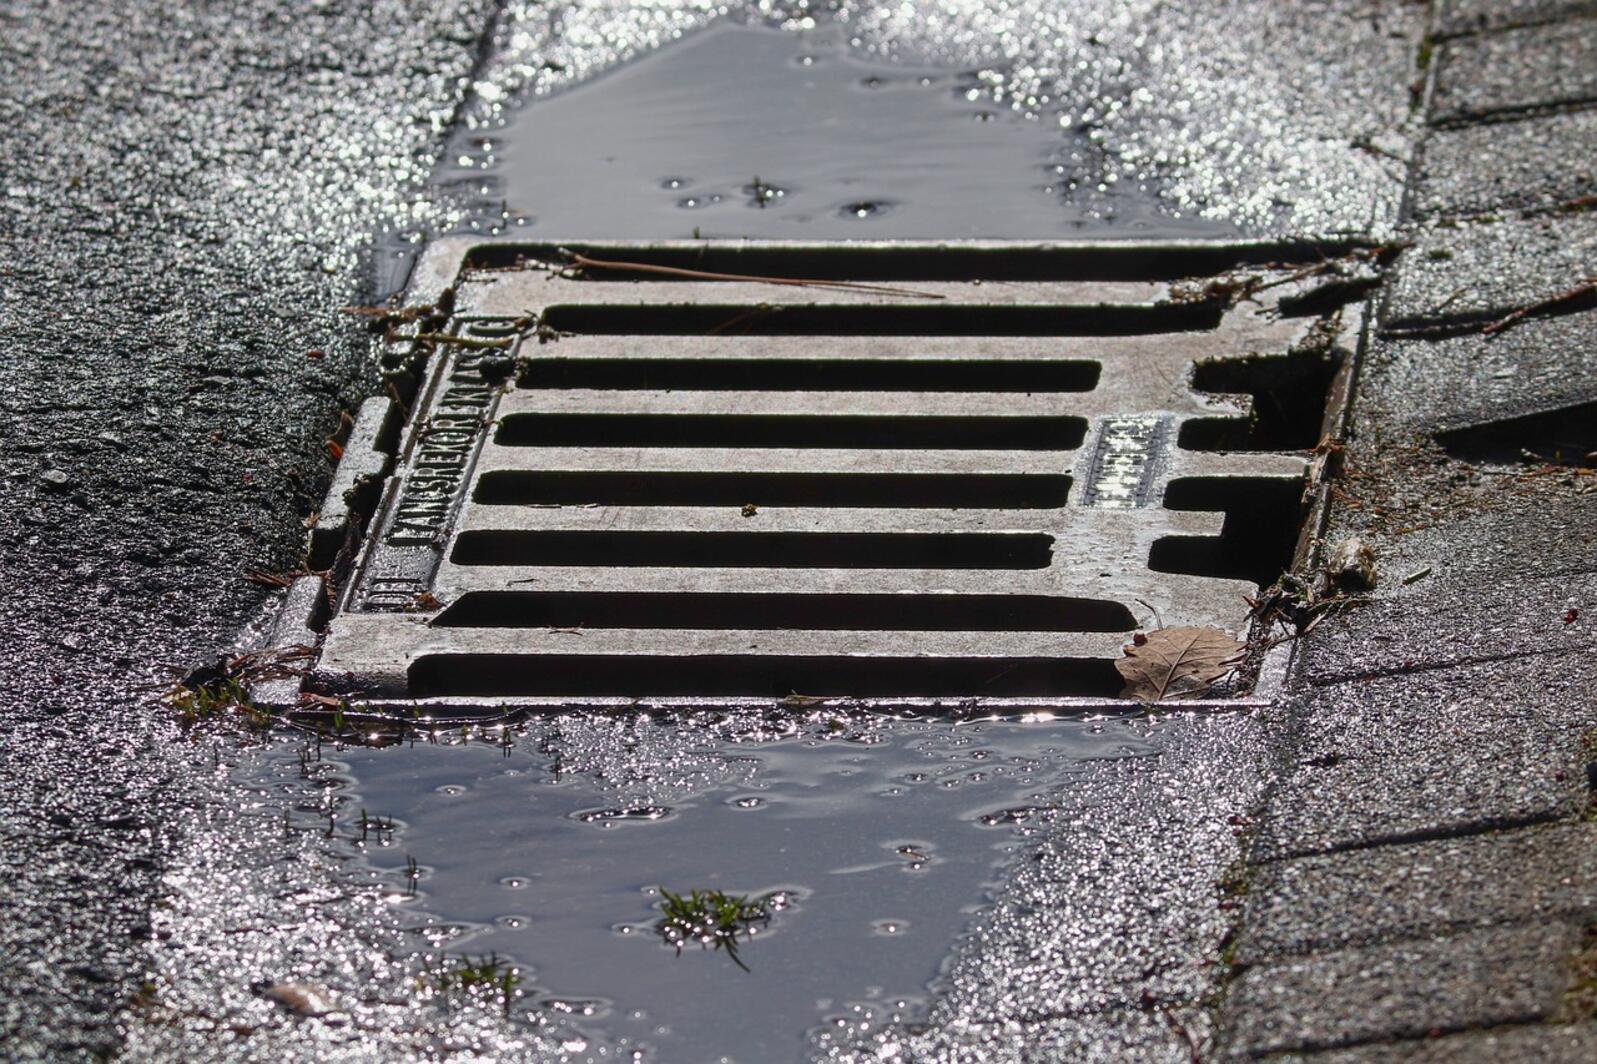 water flowing into a drainage grate in the pavement.